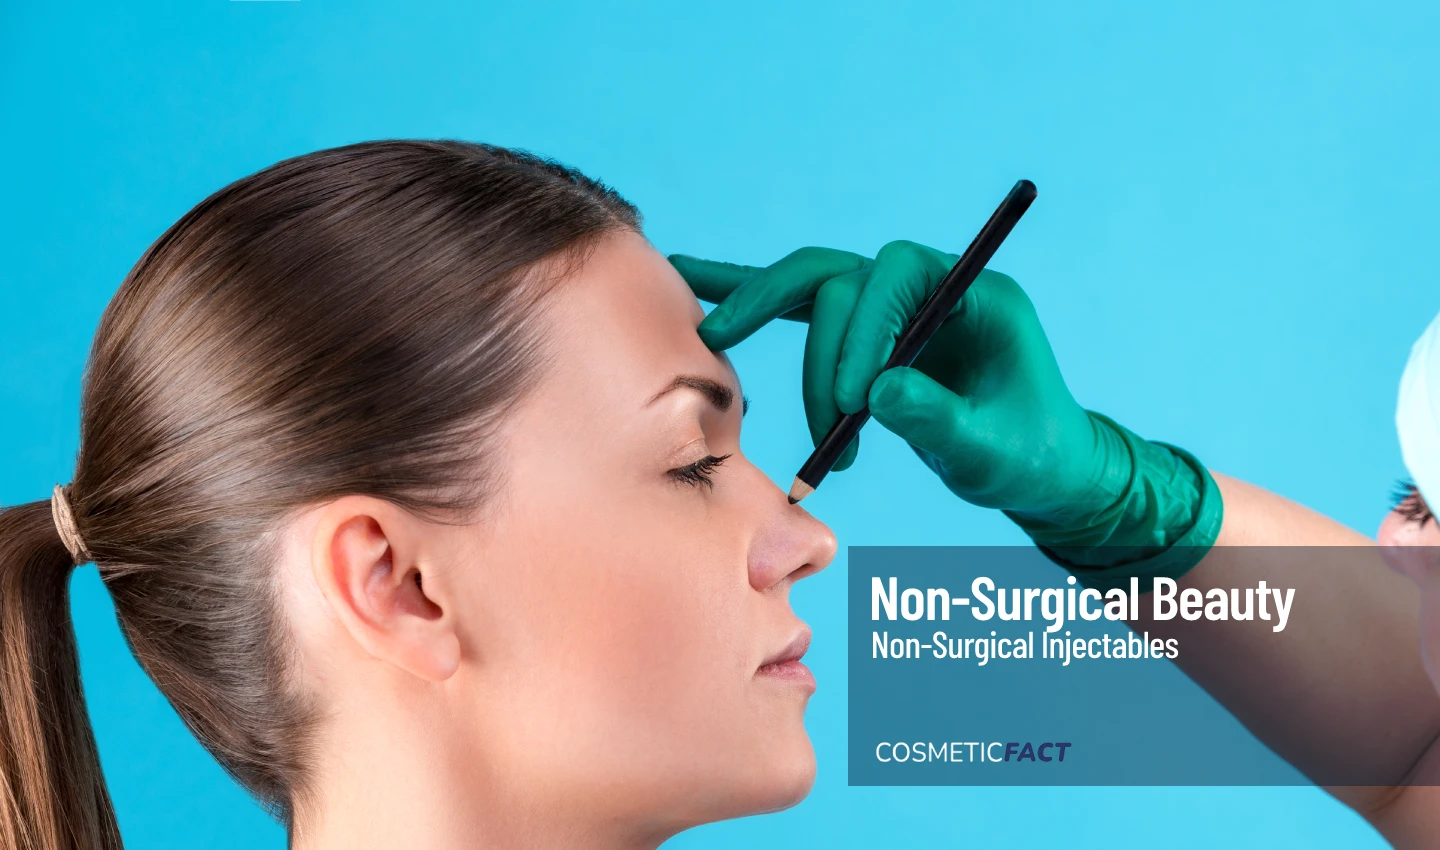 A woman having her nose marked before a non-surgical nose job with dermal fillers.